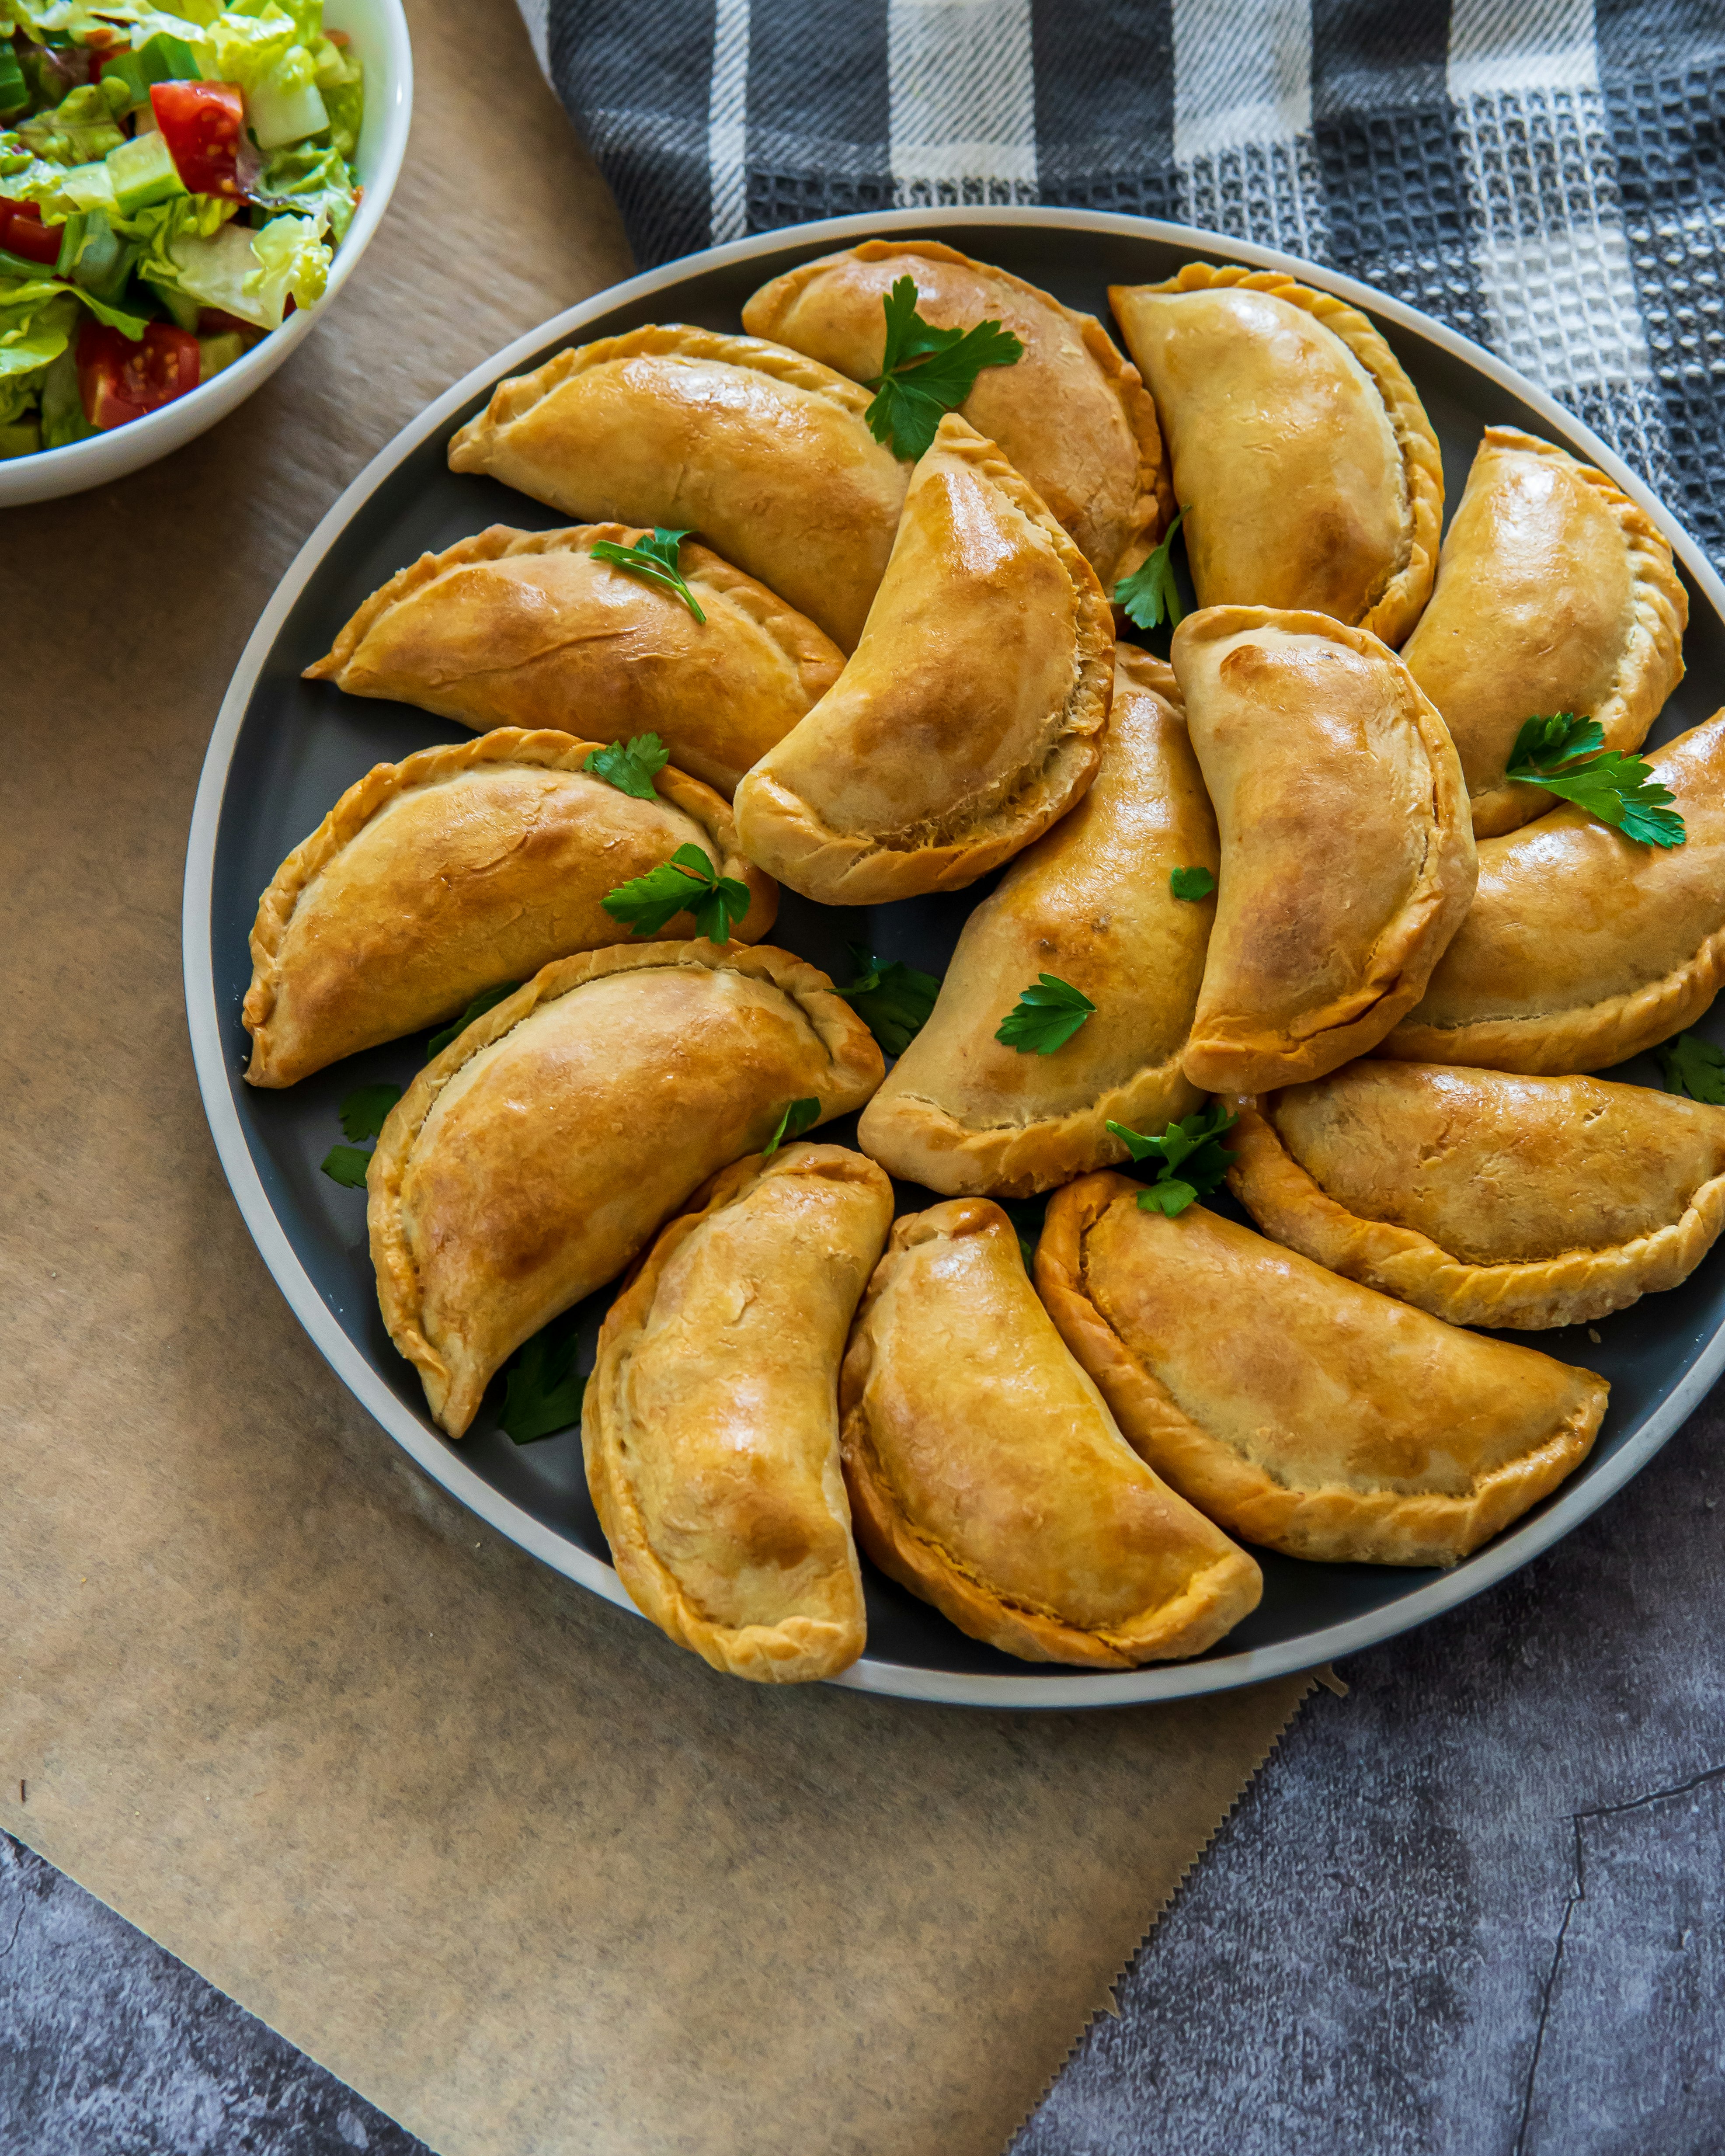 Traditional Latin American baked beef empanadas on a plate with a fresh salad side dish. Gluten free savory pastries with meat stuffing or filling. Handmade typical dish in Spain or Argentina. Top 🥟➡️

Hey 👋, Thanks for visiting! Donations help & motivate me to keep uploading more 📸's and 🎥’s. Even a buck or two helps (or a cup of coffee ☕). Thank you